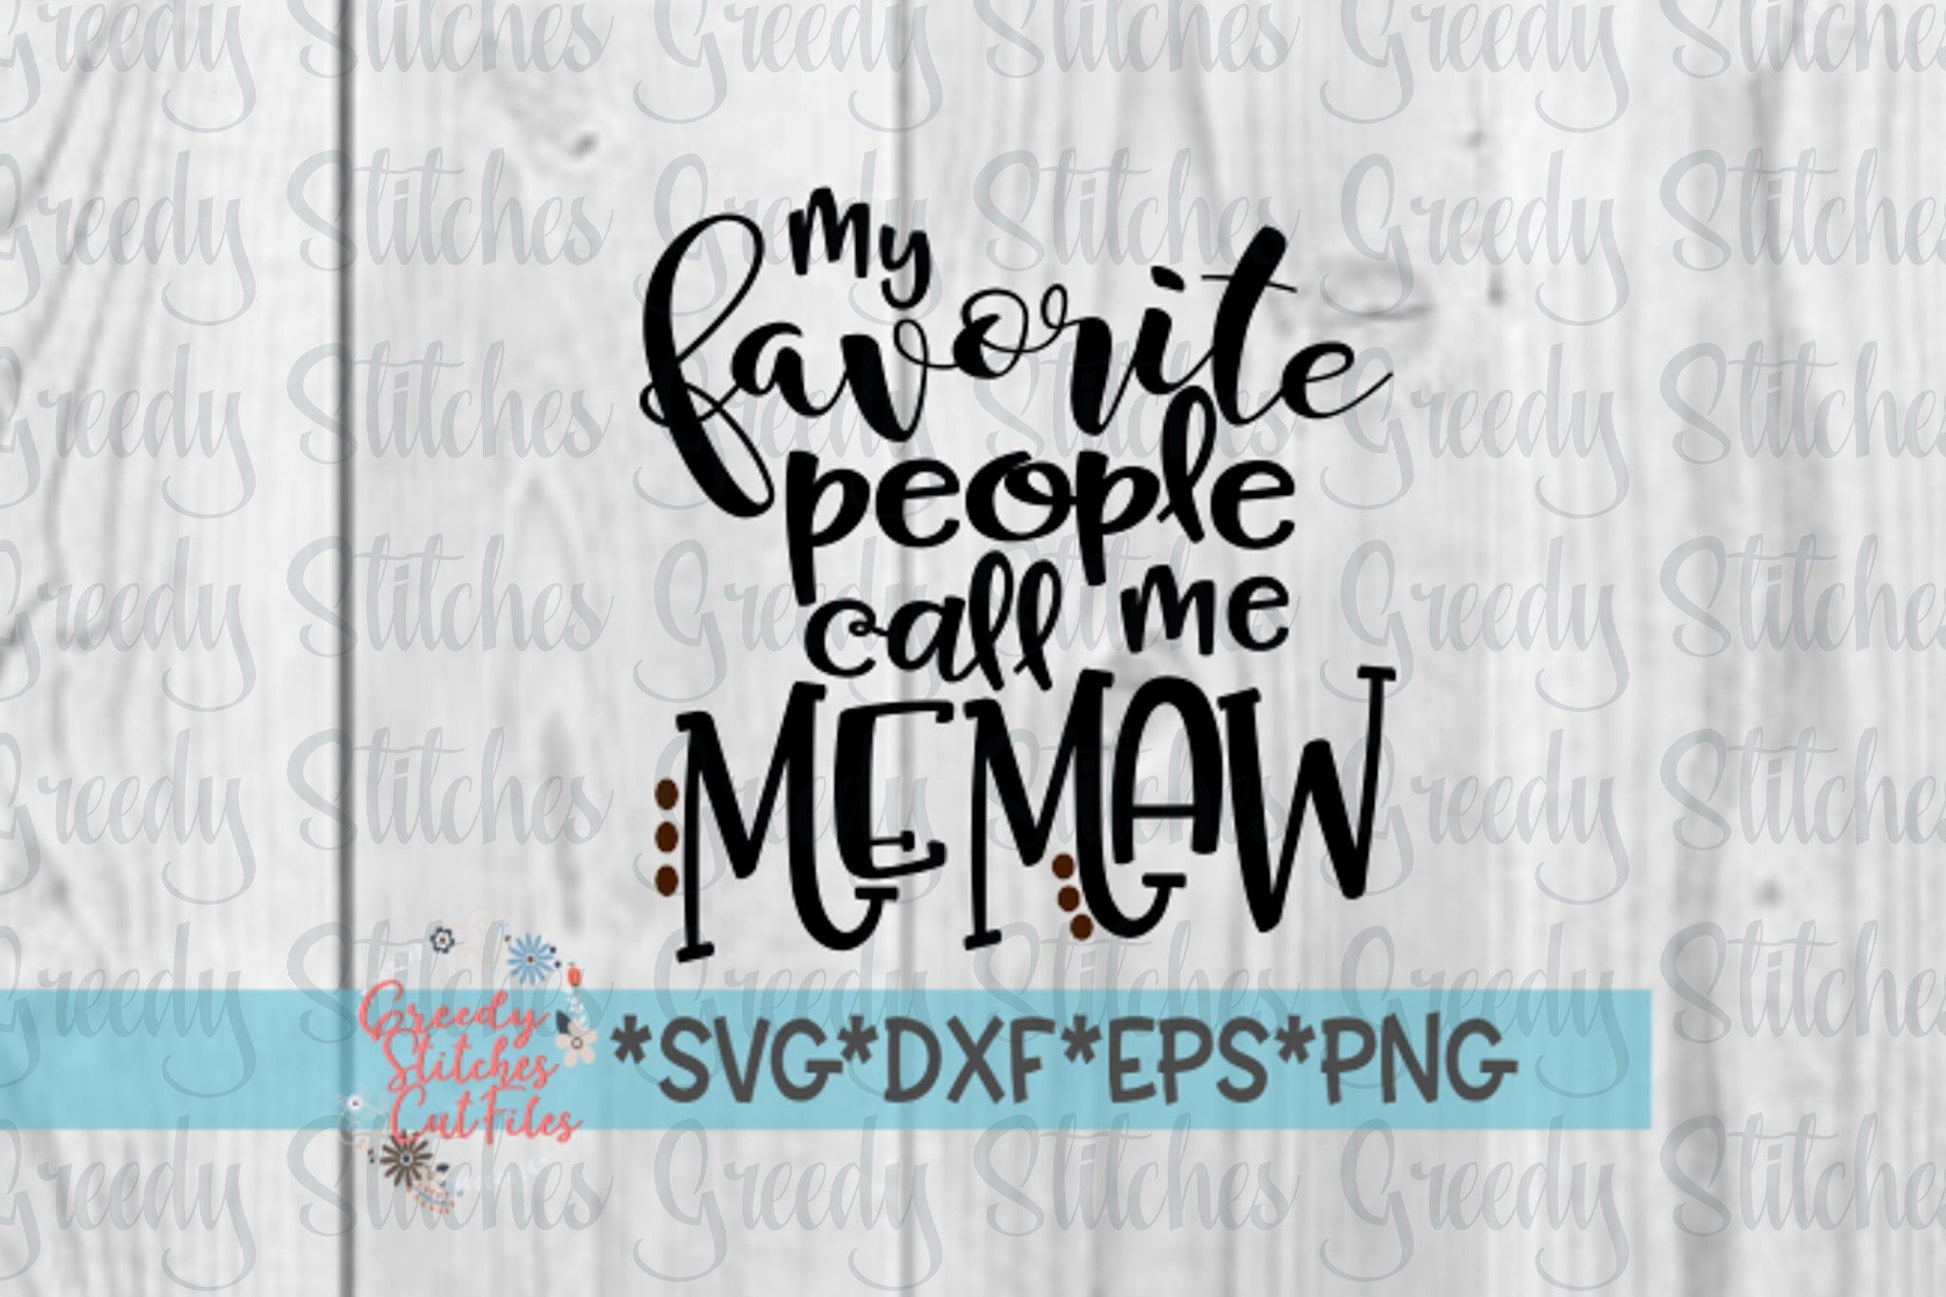 My Favorite People Call Me Memaw | Mother&#39;s Day SVG | Memaw SVG | Memaw DxF | Grandmother svg, dxf, eps, png. Instant Download Cut File.